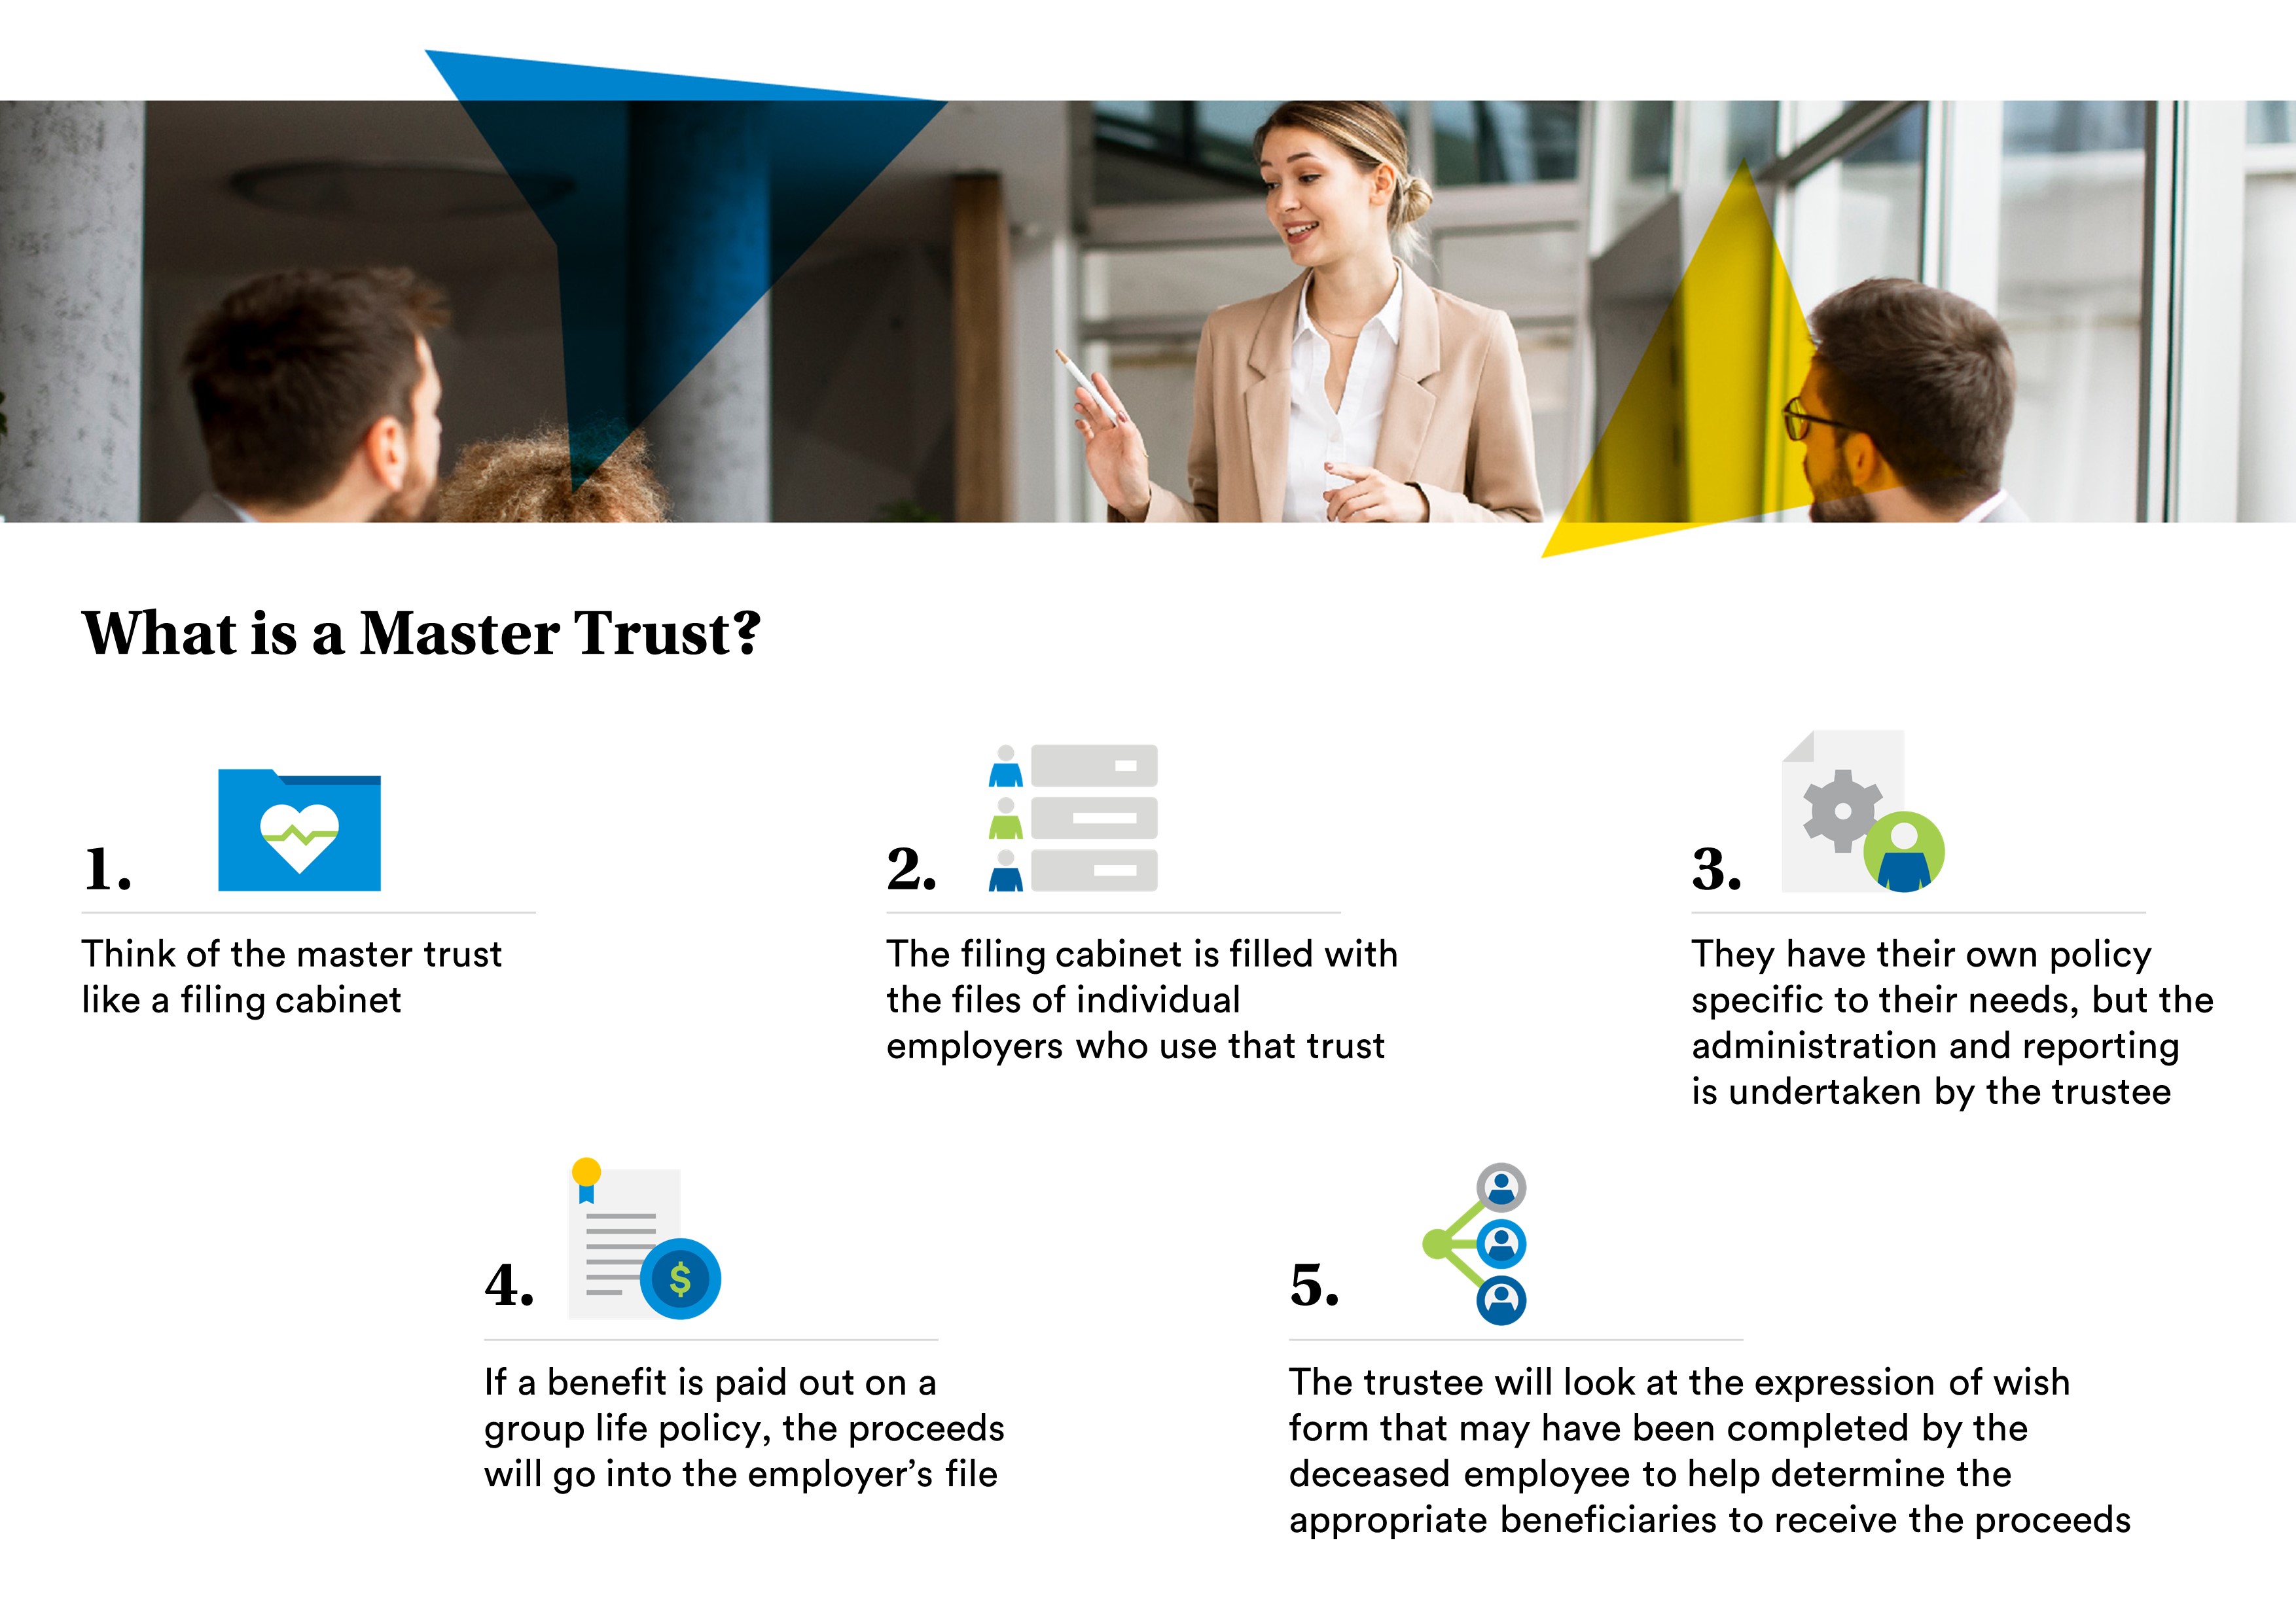 What is a master trust? 1. Think of the master trust like a filing cabinet. 2. The filing cabinet is filled with the files of individual employers who use that trust. 3. They have their own policy specific to their needs, but the administration and reporting is undertaken by the trustee. 4. If a benefit is paid out on a group life policy, the proceeds will go into the employer's file. 5. The trustee will look at the expression of wish form that may have been completed by the deceased employee to help determine the appropriate beneficiaries to receive the proceeds.